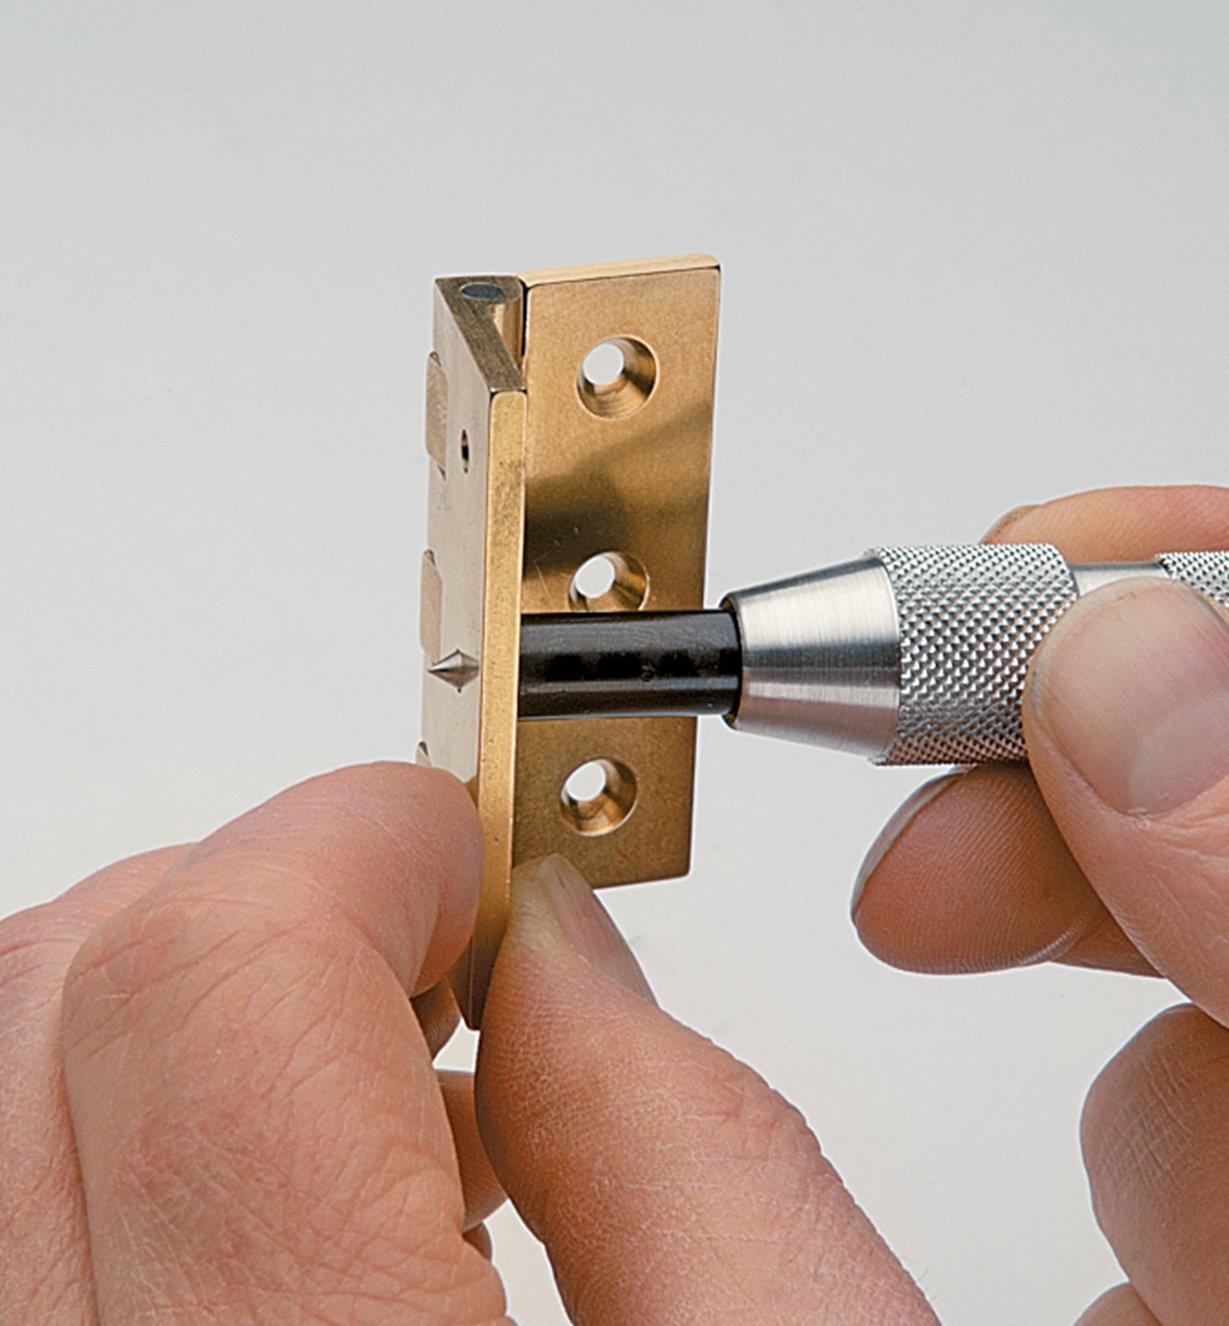 Inserting the Hinge-Locating Punch into the screw hole of a hinge